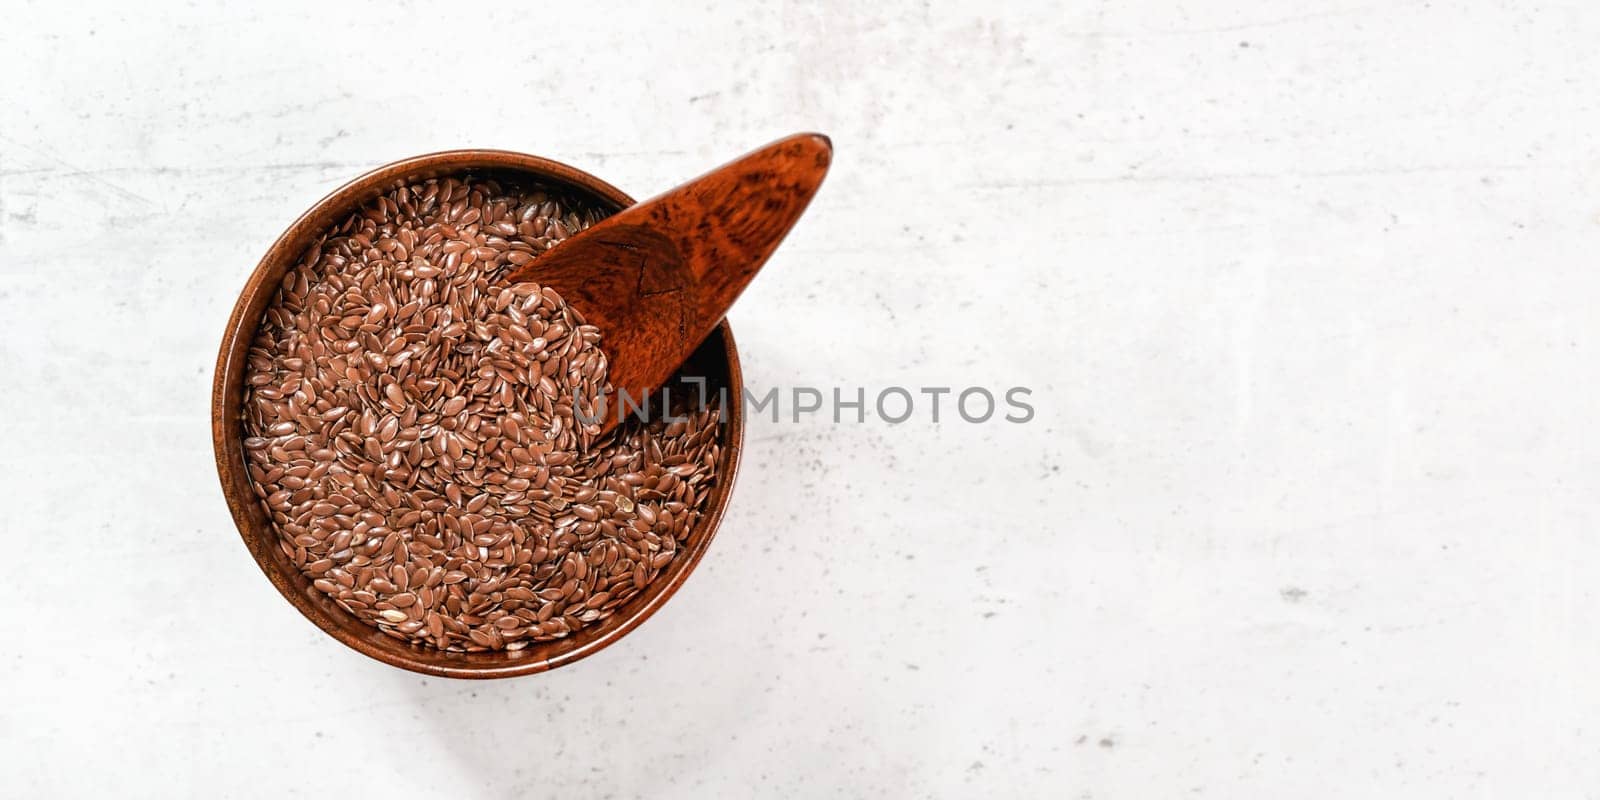 Small wooden bowl full of common flax linseed - Linum usitatissimum - little scoop inside, on white stone like desk, view from above, space for text right side